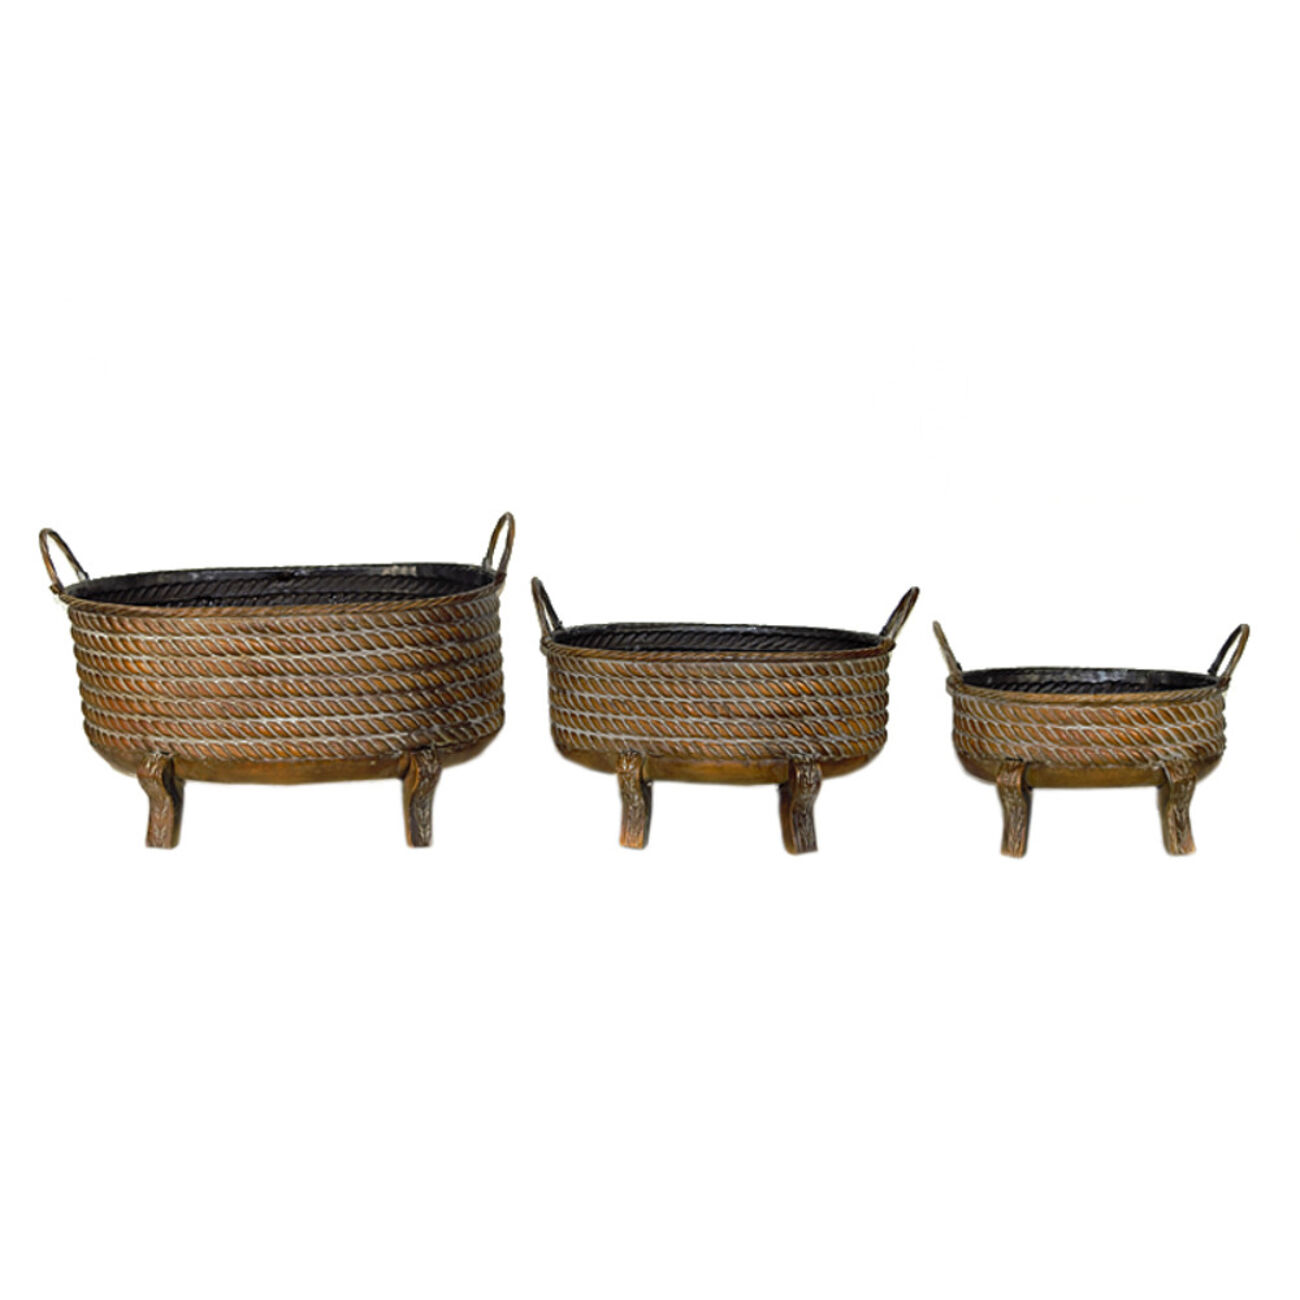 Vintage Style 3Piece Metal Planter With Handles, Brown